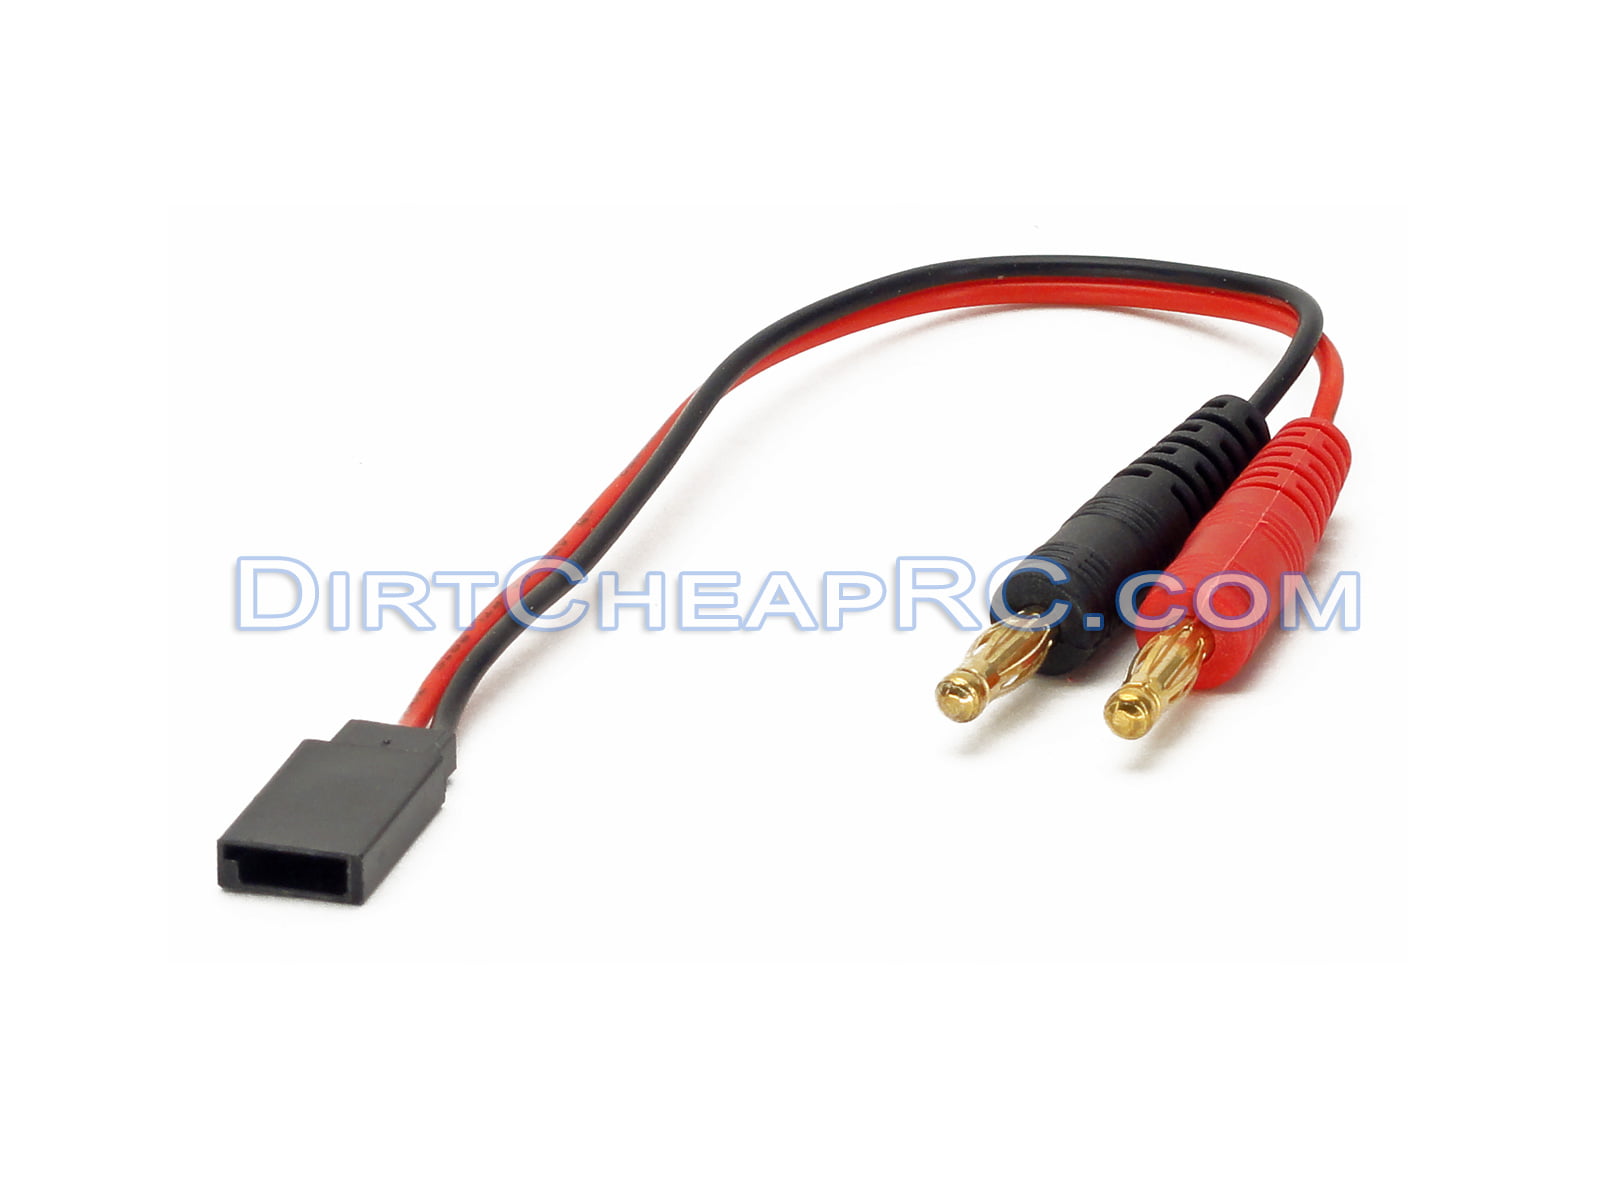 Deans T-Plug Male to Futaba JR Male Charger Cable Adapter For Receiver,Rx Servo 